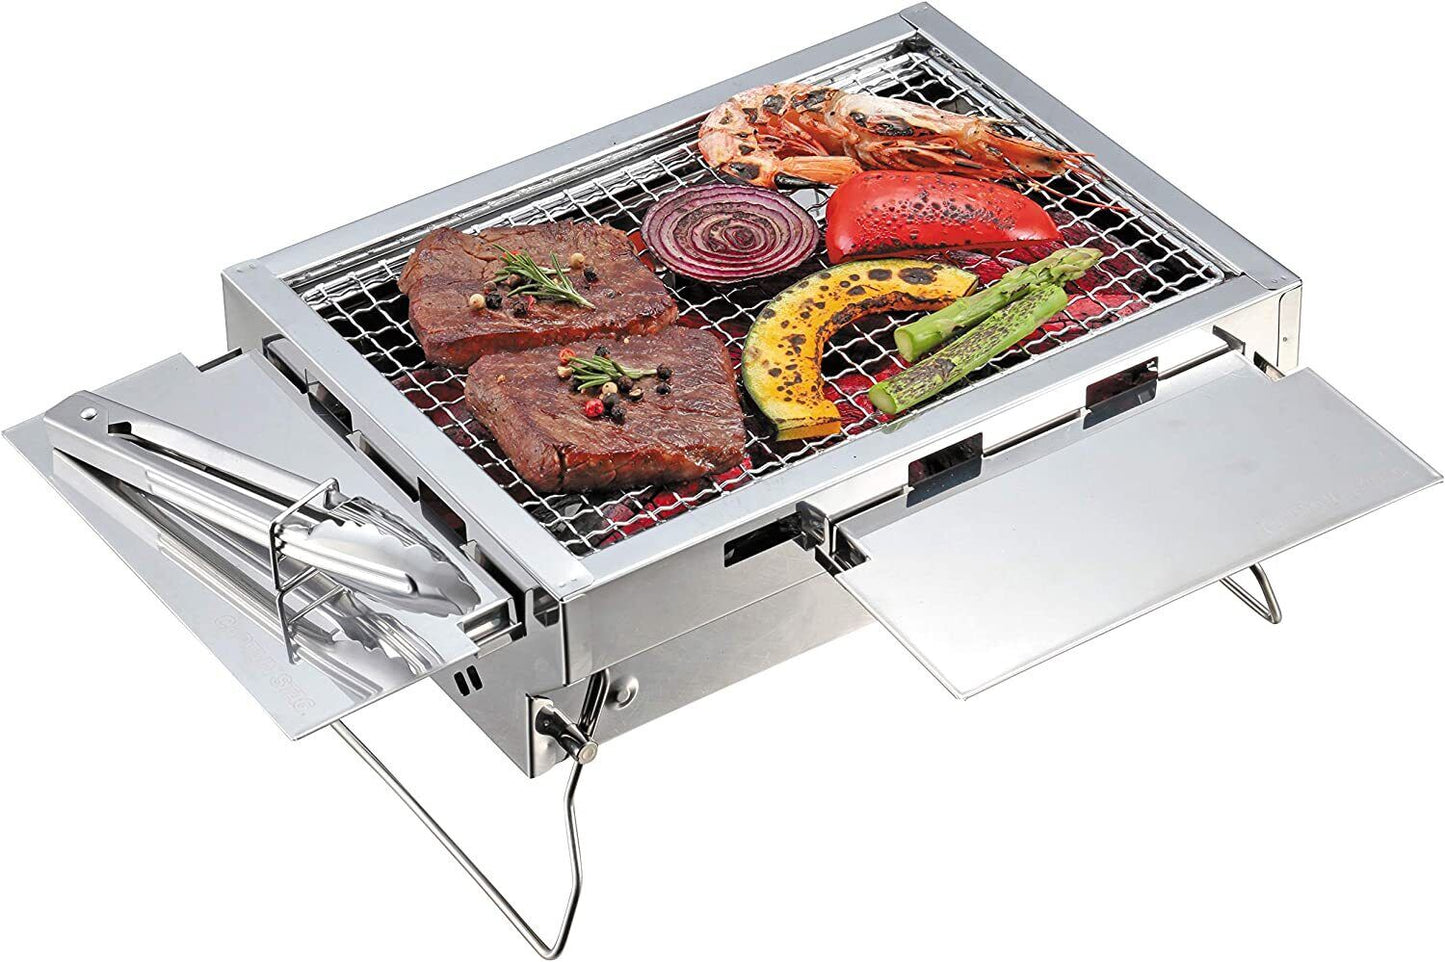 UG-62 Captain Stag BBQ stove stainless steel solo grill compact size UG-62 New